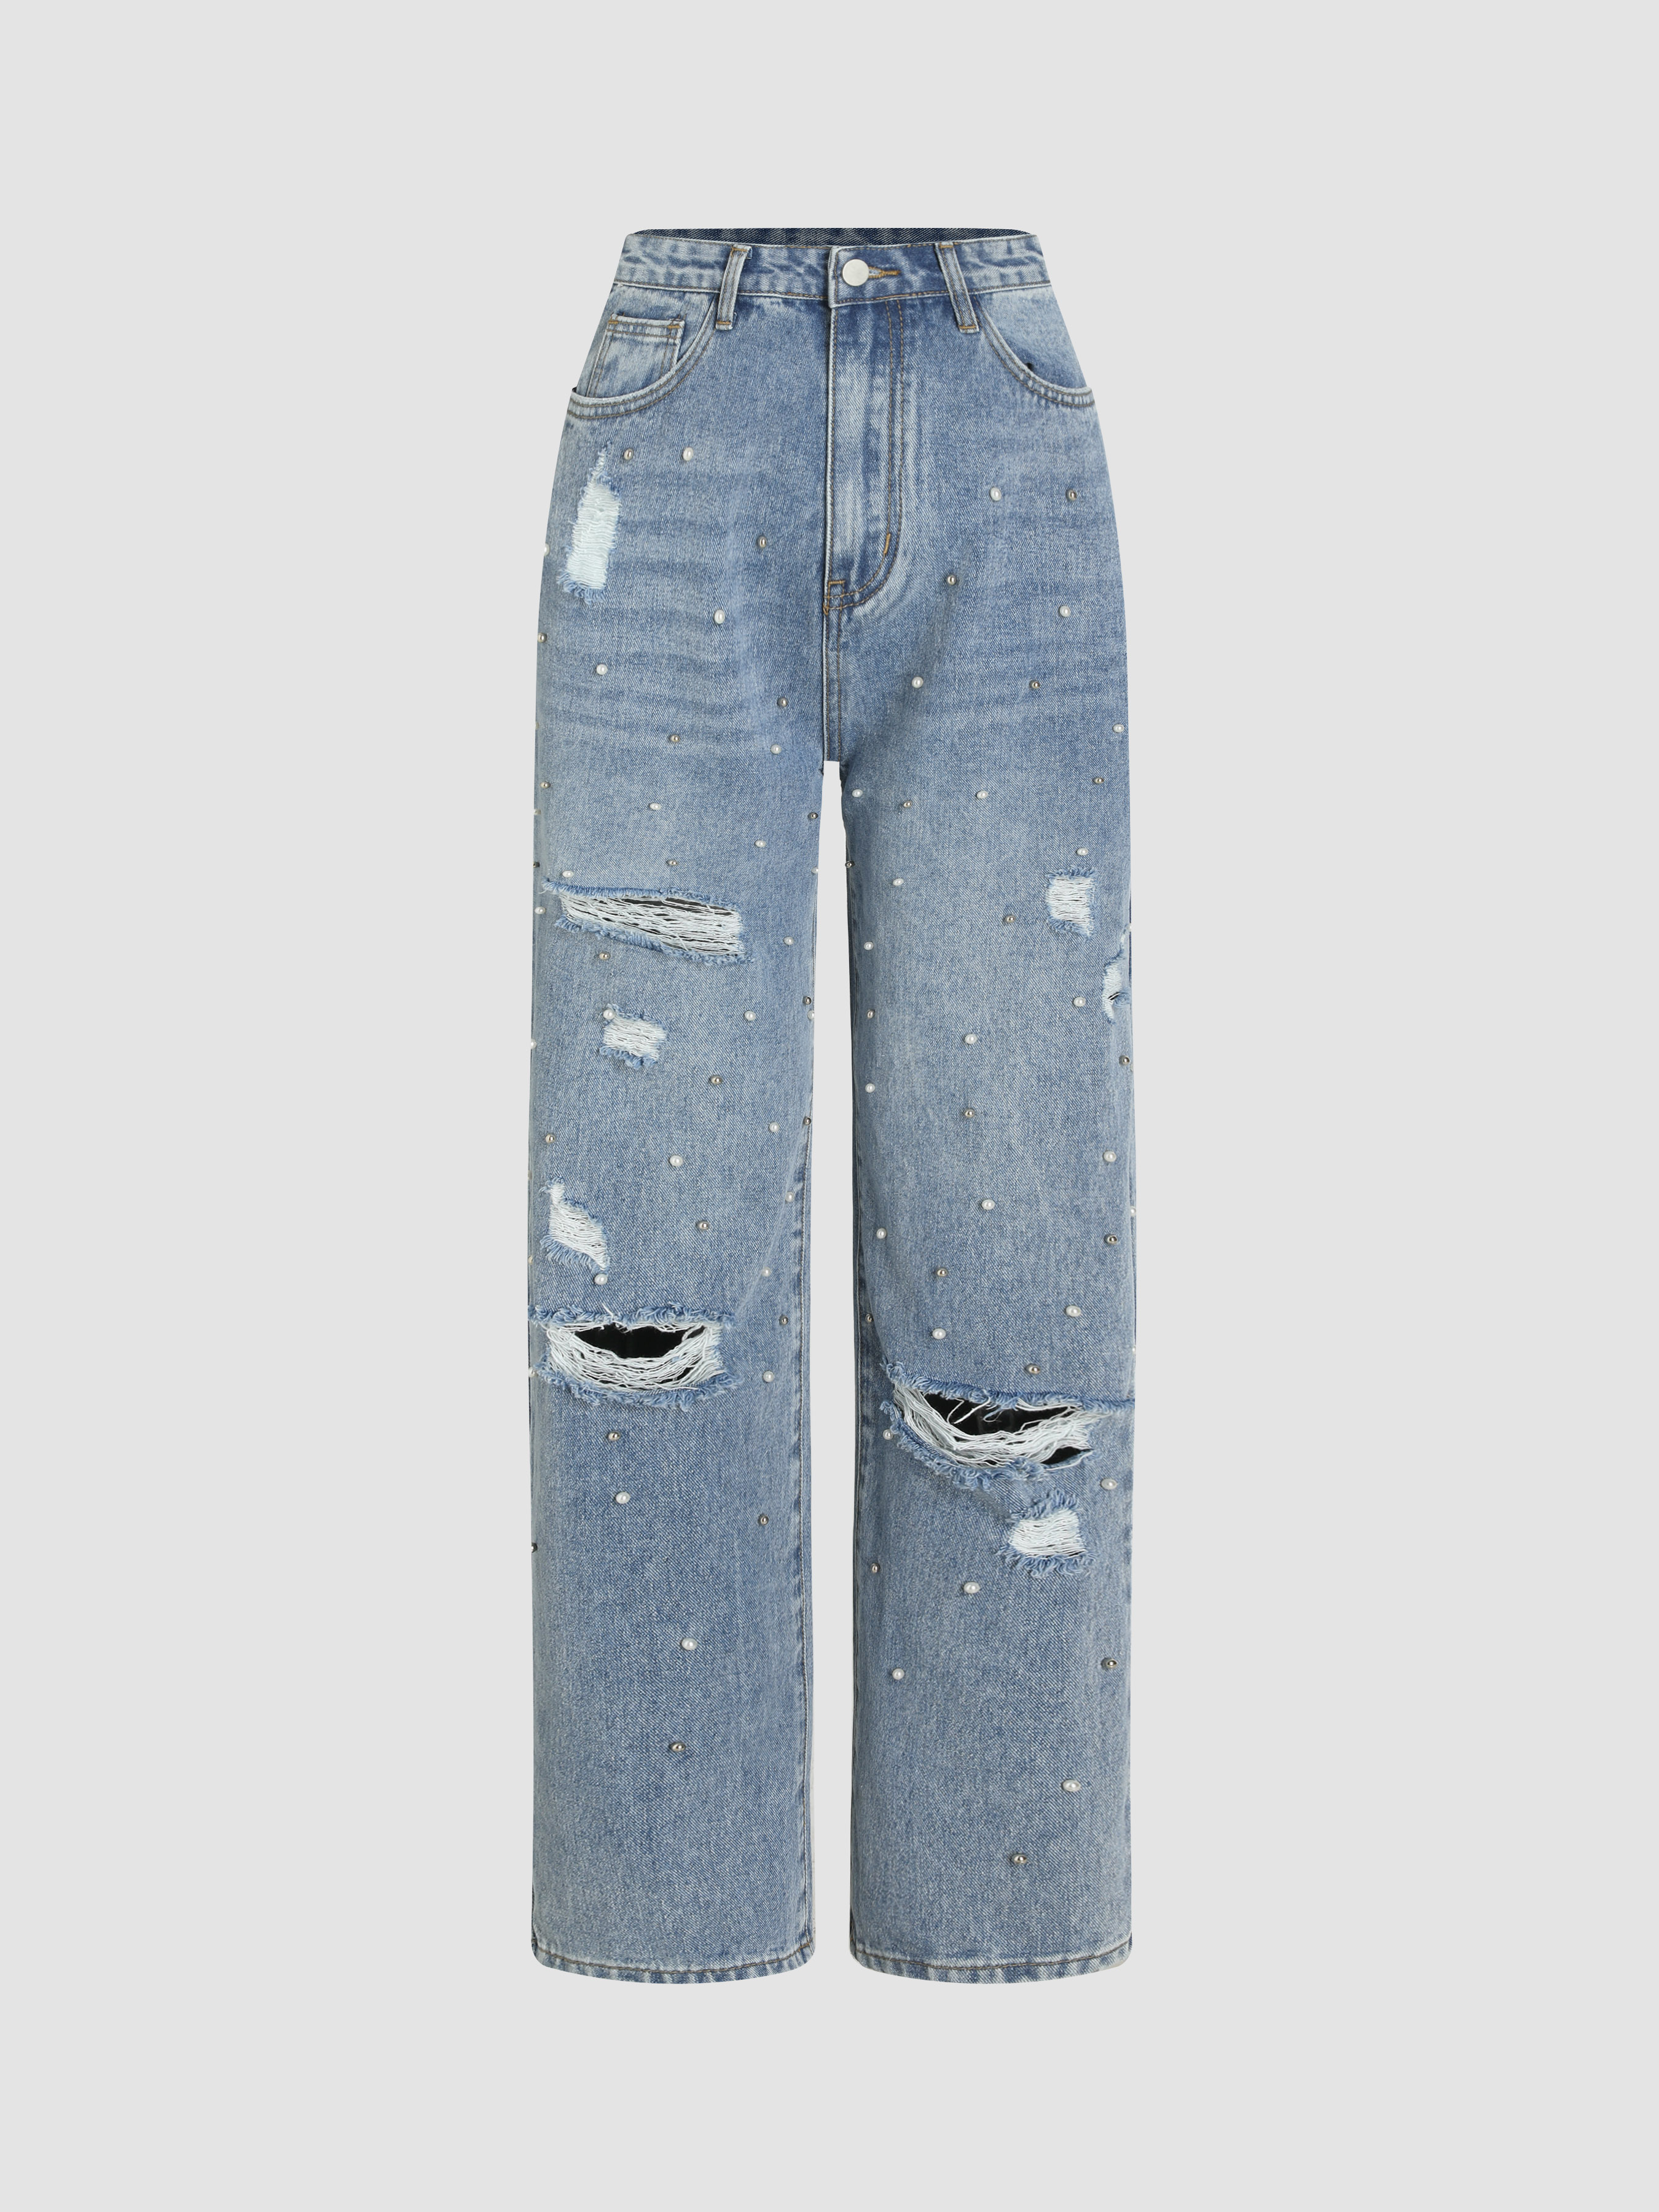 Denim Faux Pearl High Waist Ripped Jeans - Cider